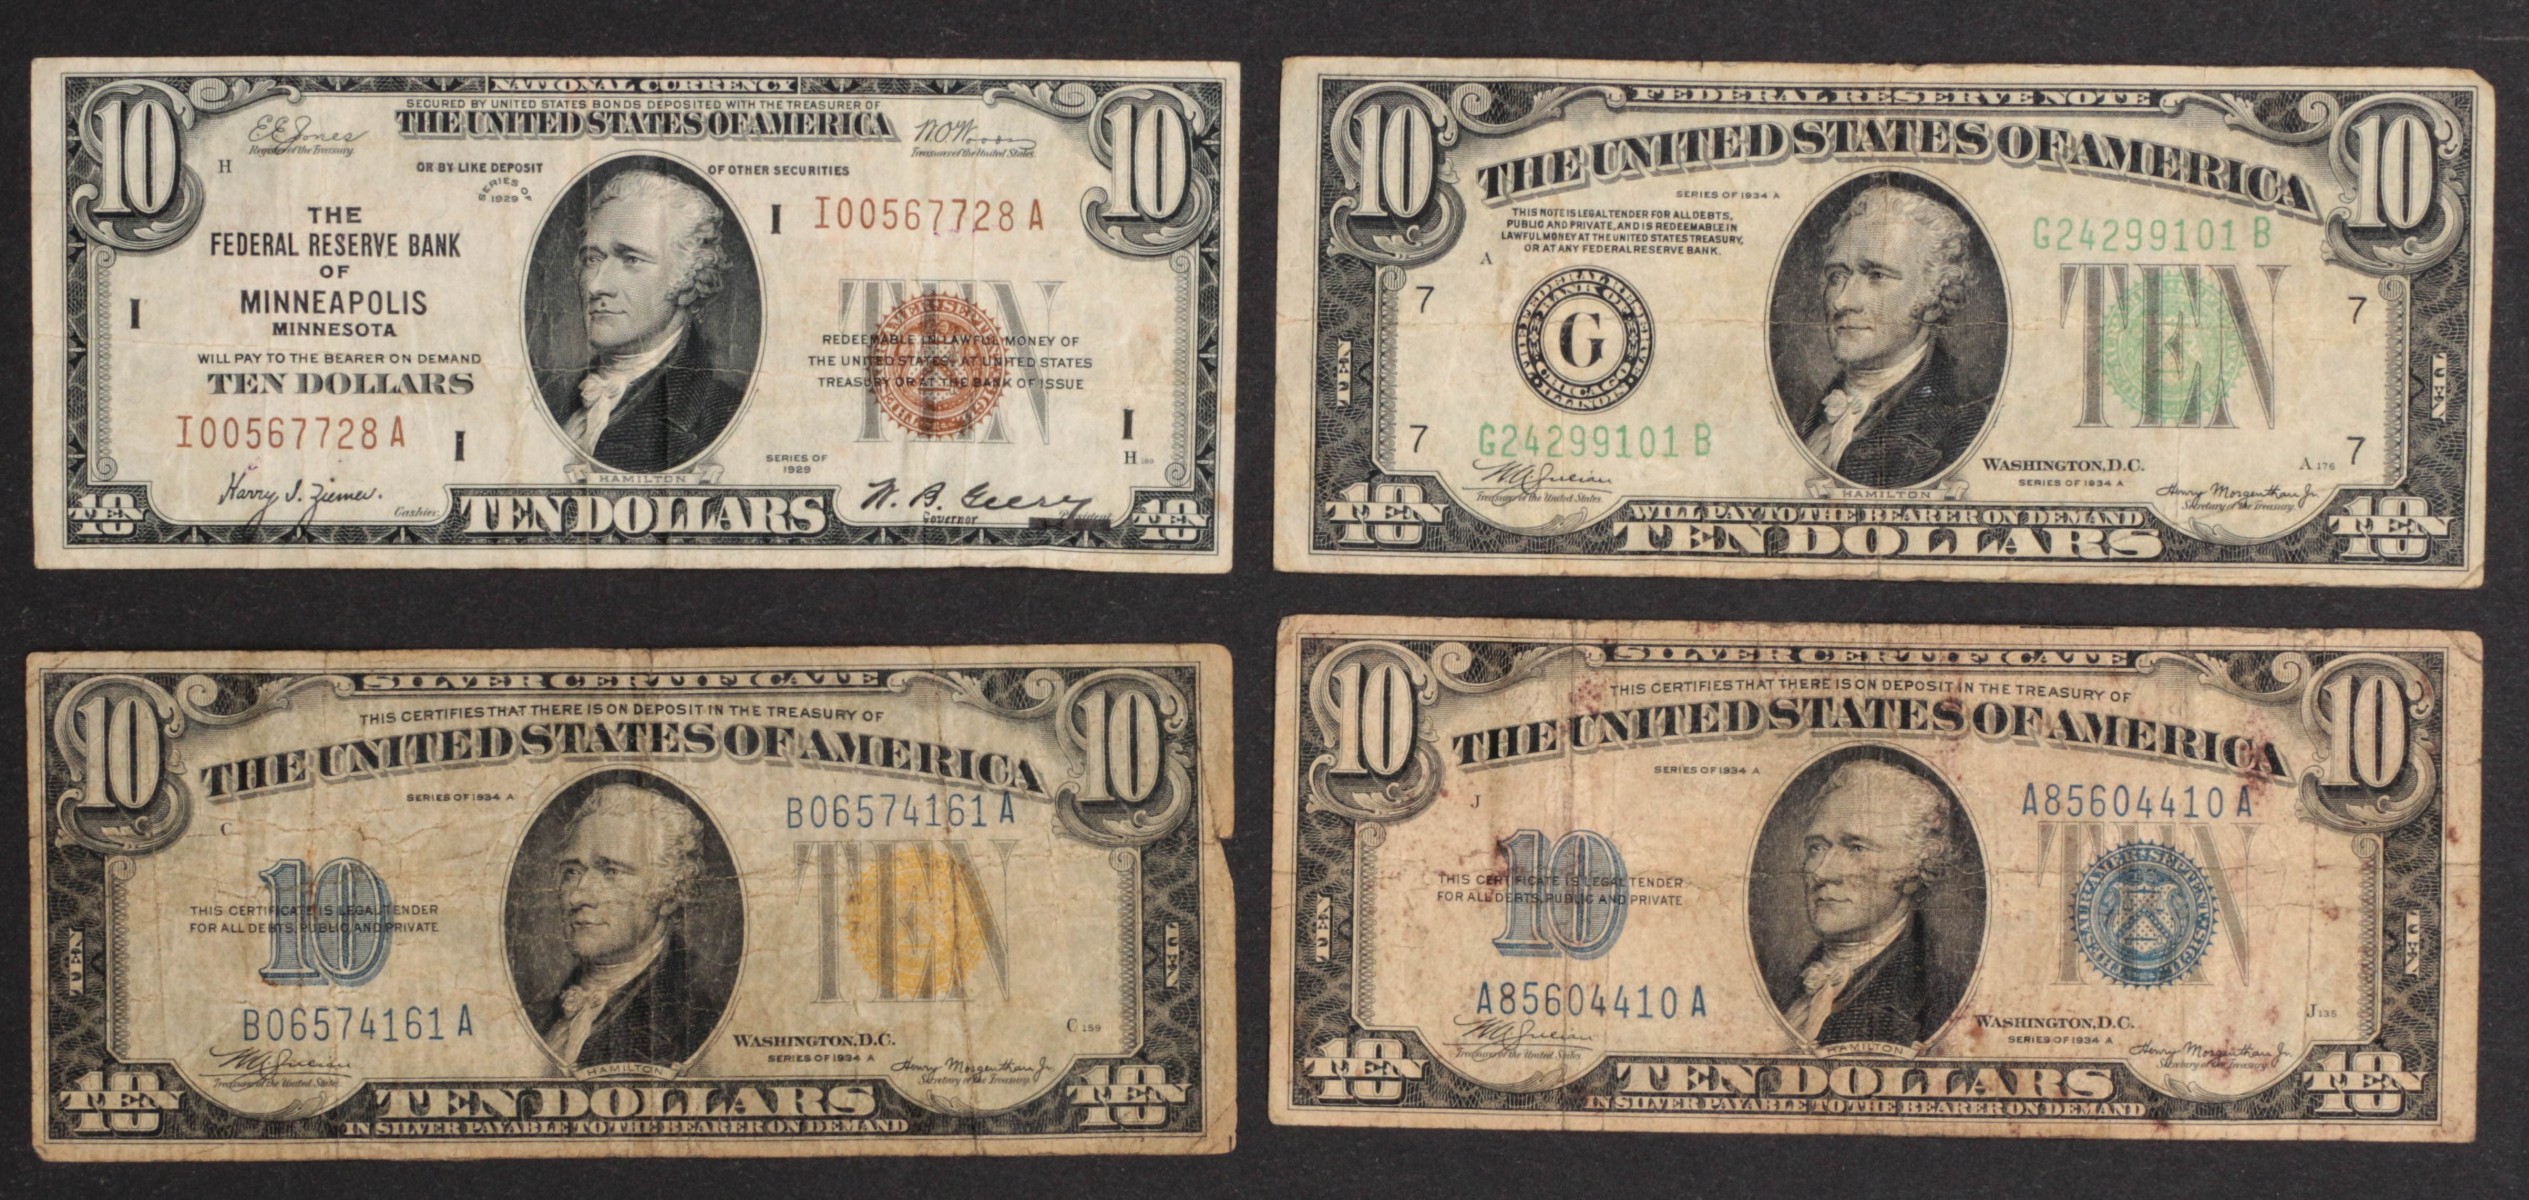 U.S. CURRENCY $10 BILLS FROM THE 1930s